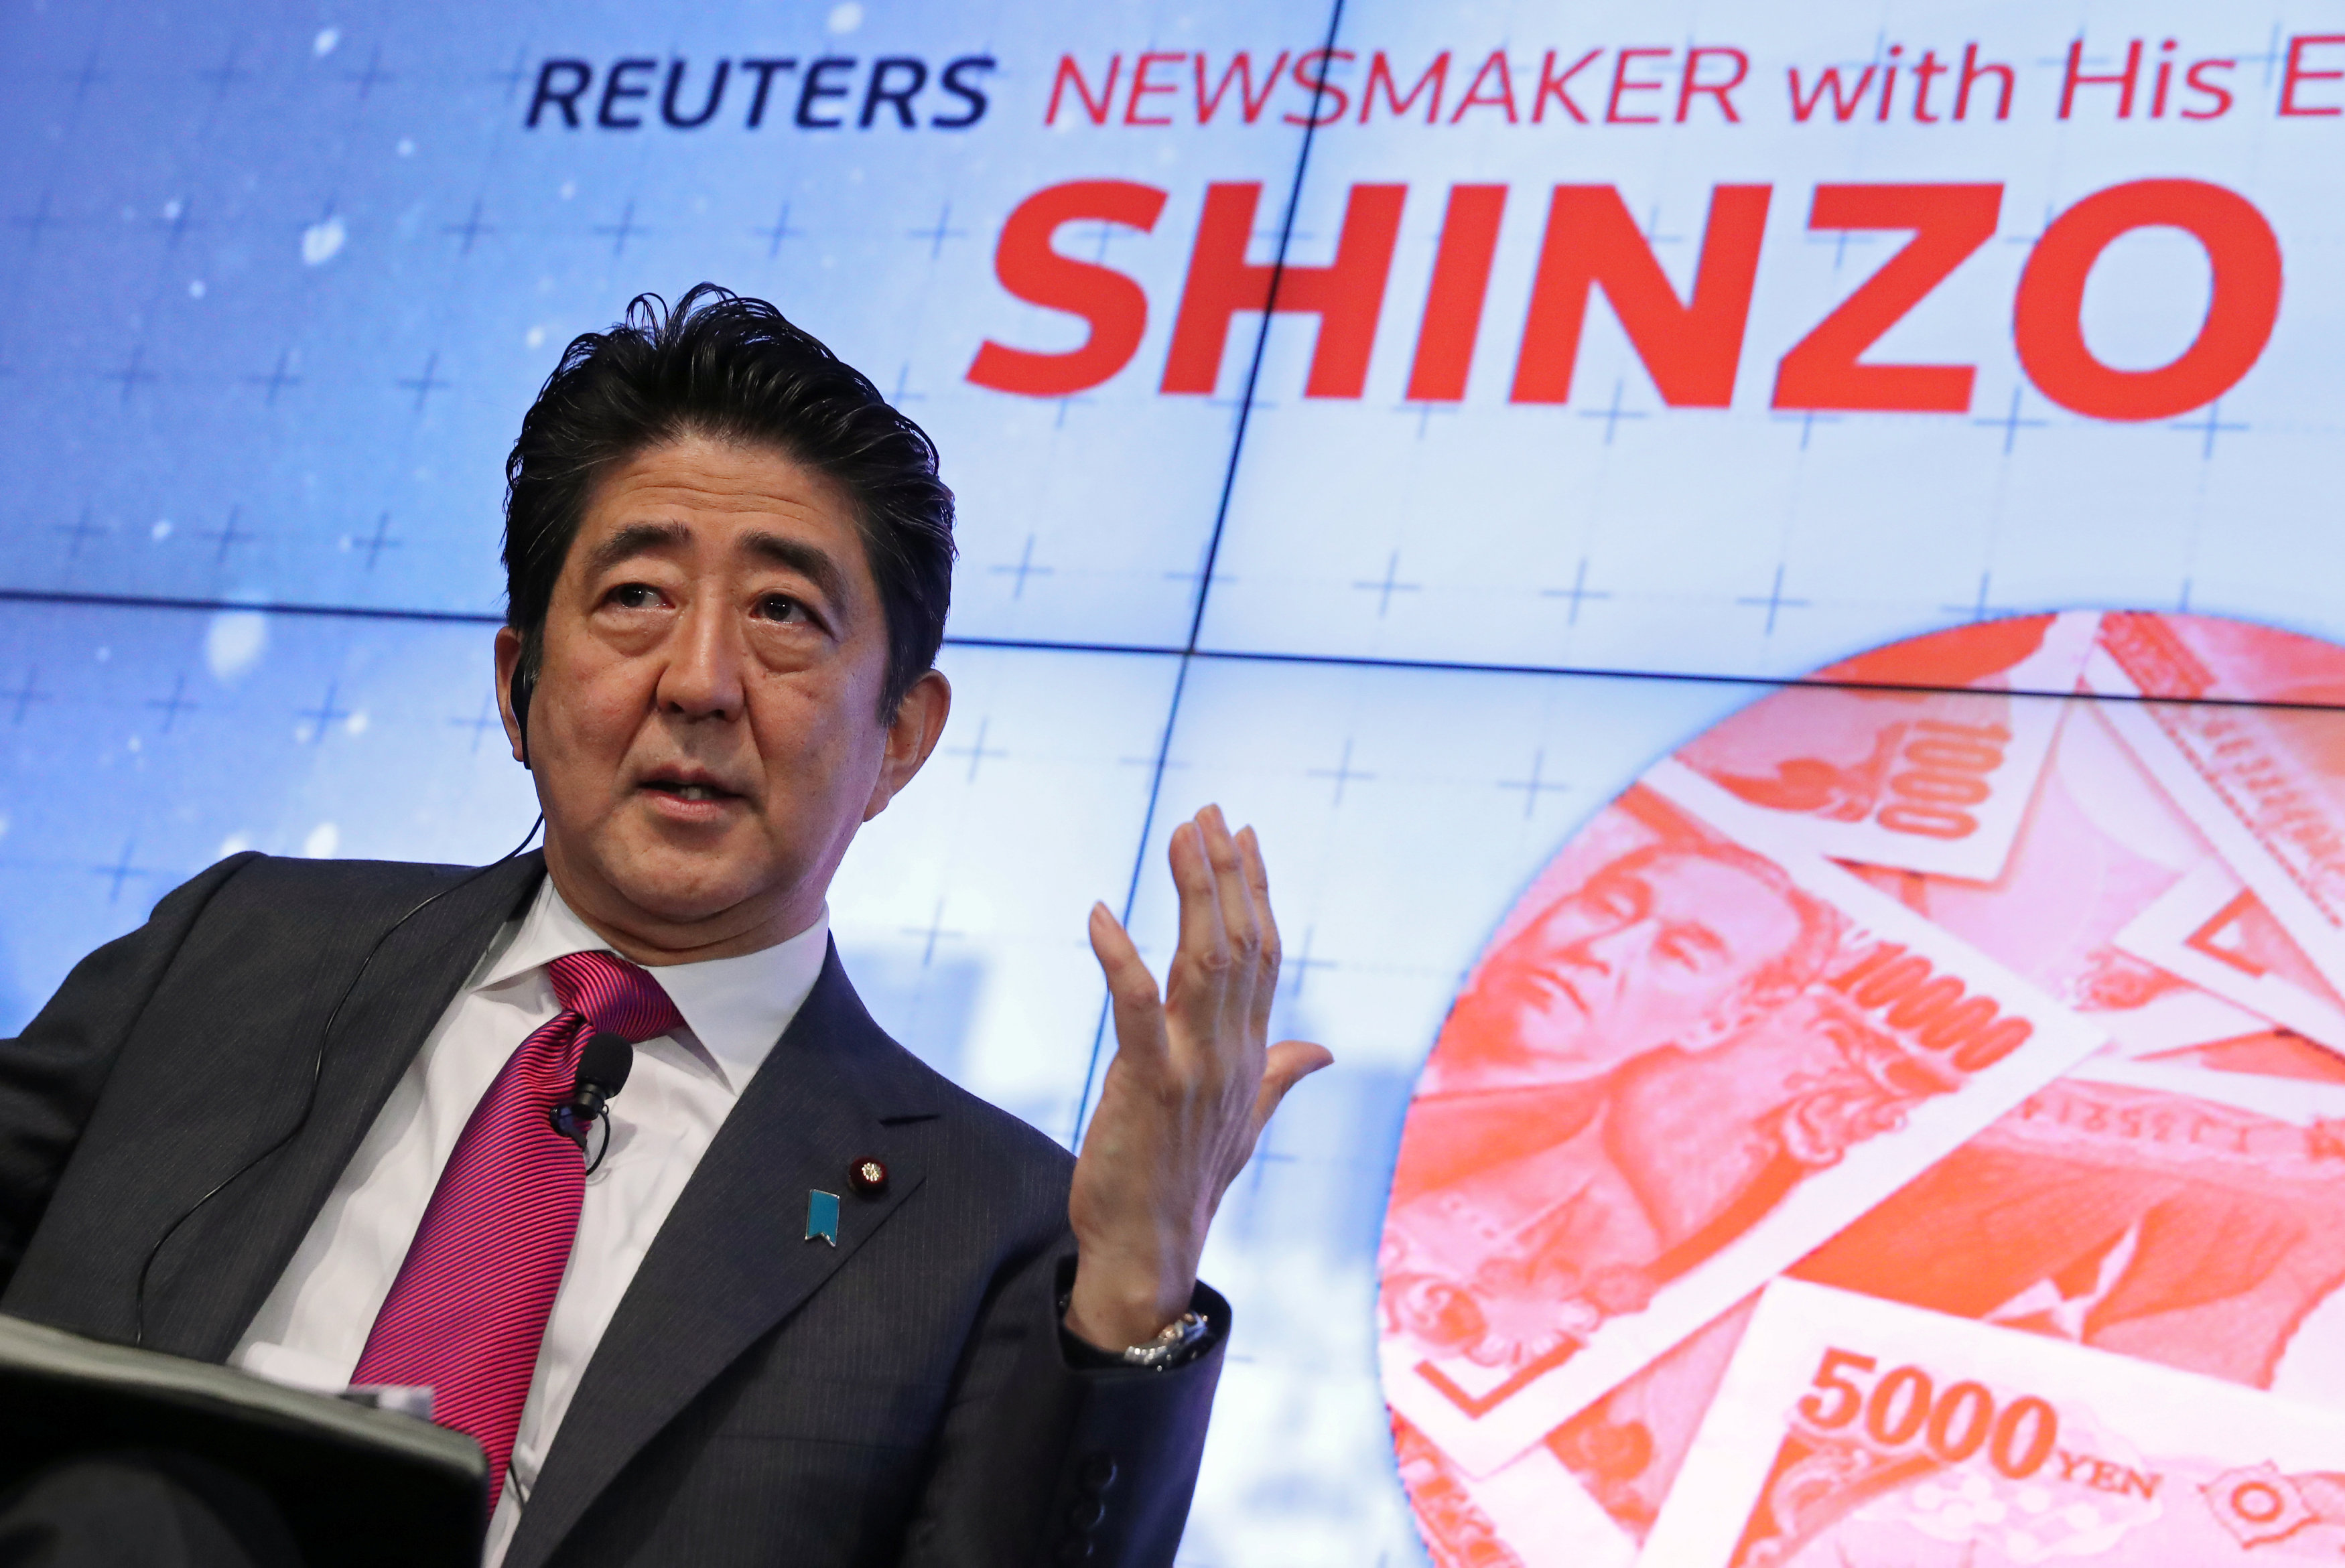 Prime Minister Shinzo Abe speaks during a Reuters Newsmaker conversation in New York on Wednesday. | REUTERS